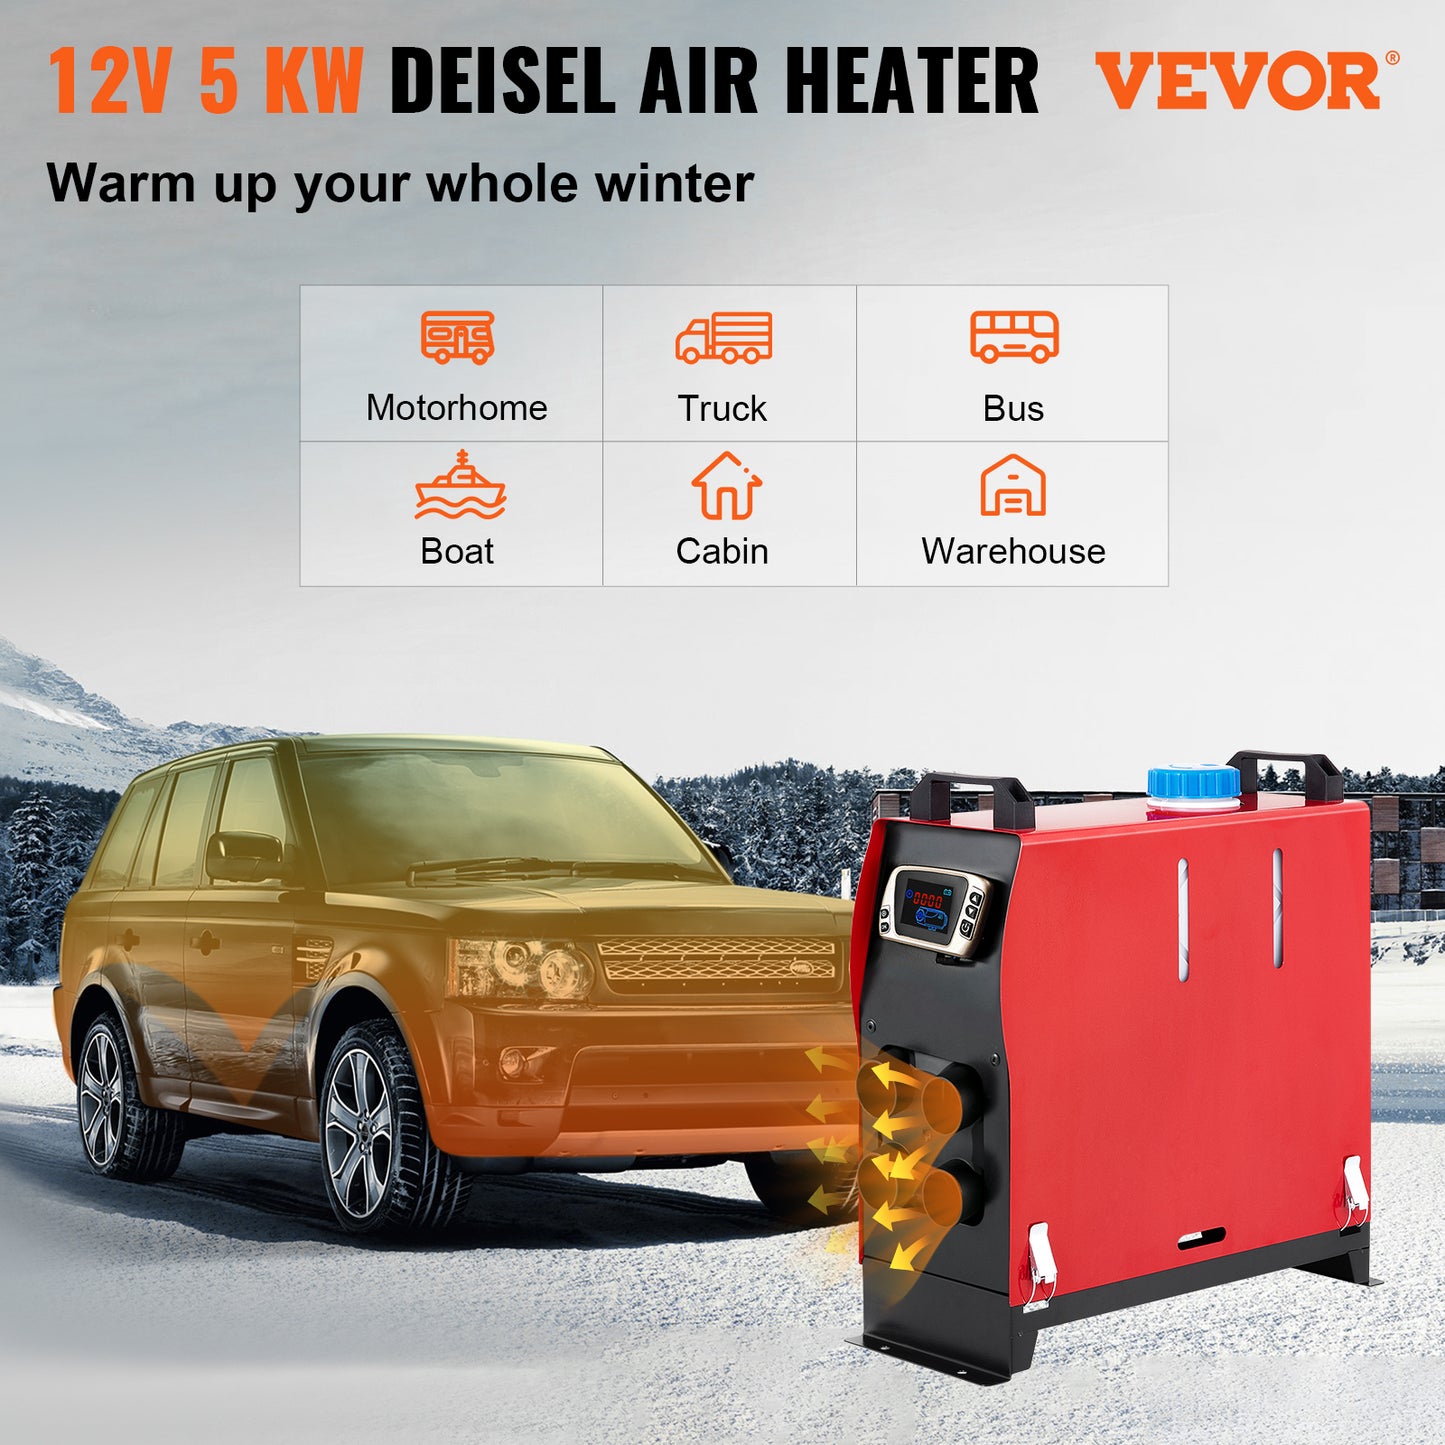 Diesel Air Heater Plateau for Heating & Fans - Car Electrical Appliances with LCD Switch - 12V, 2.5-8KW.